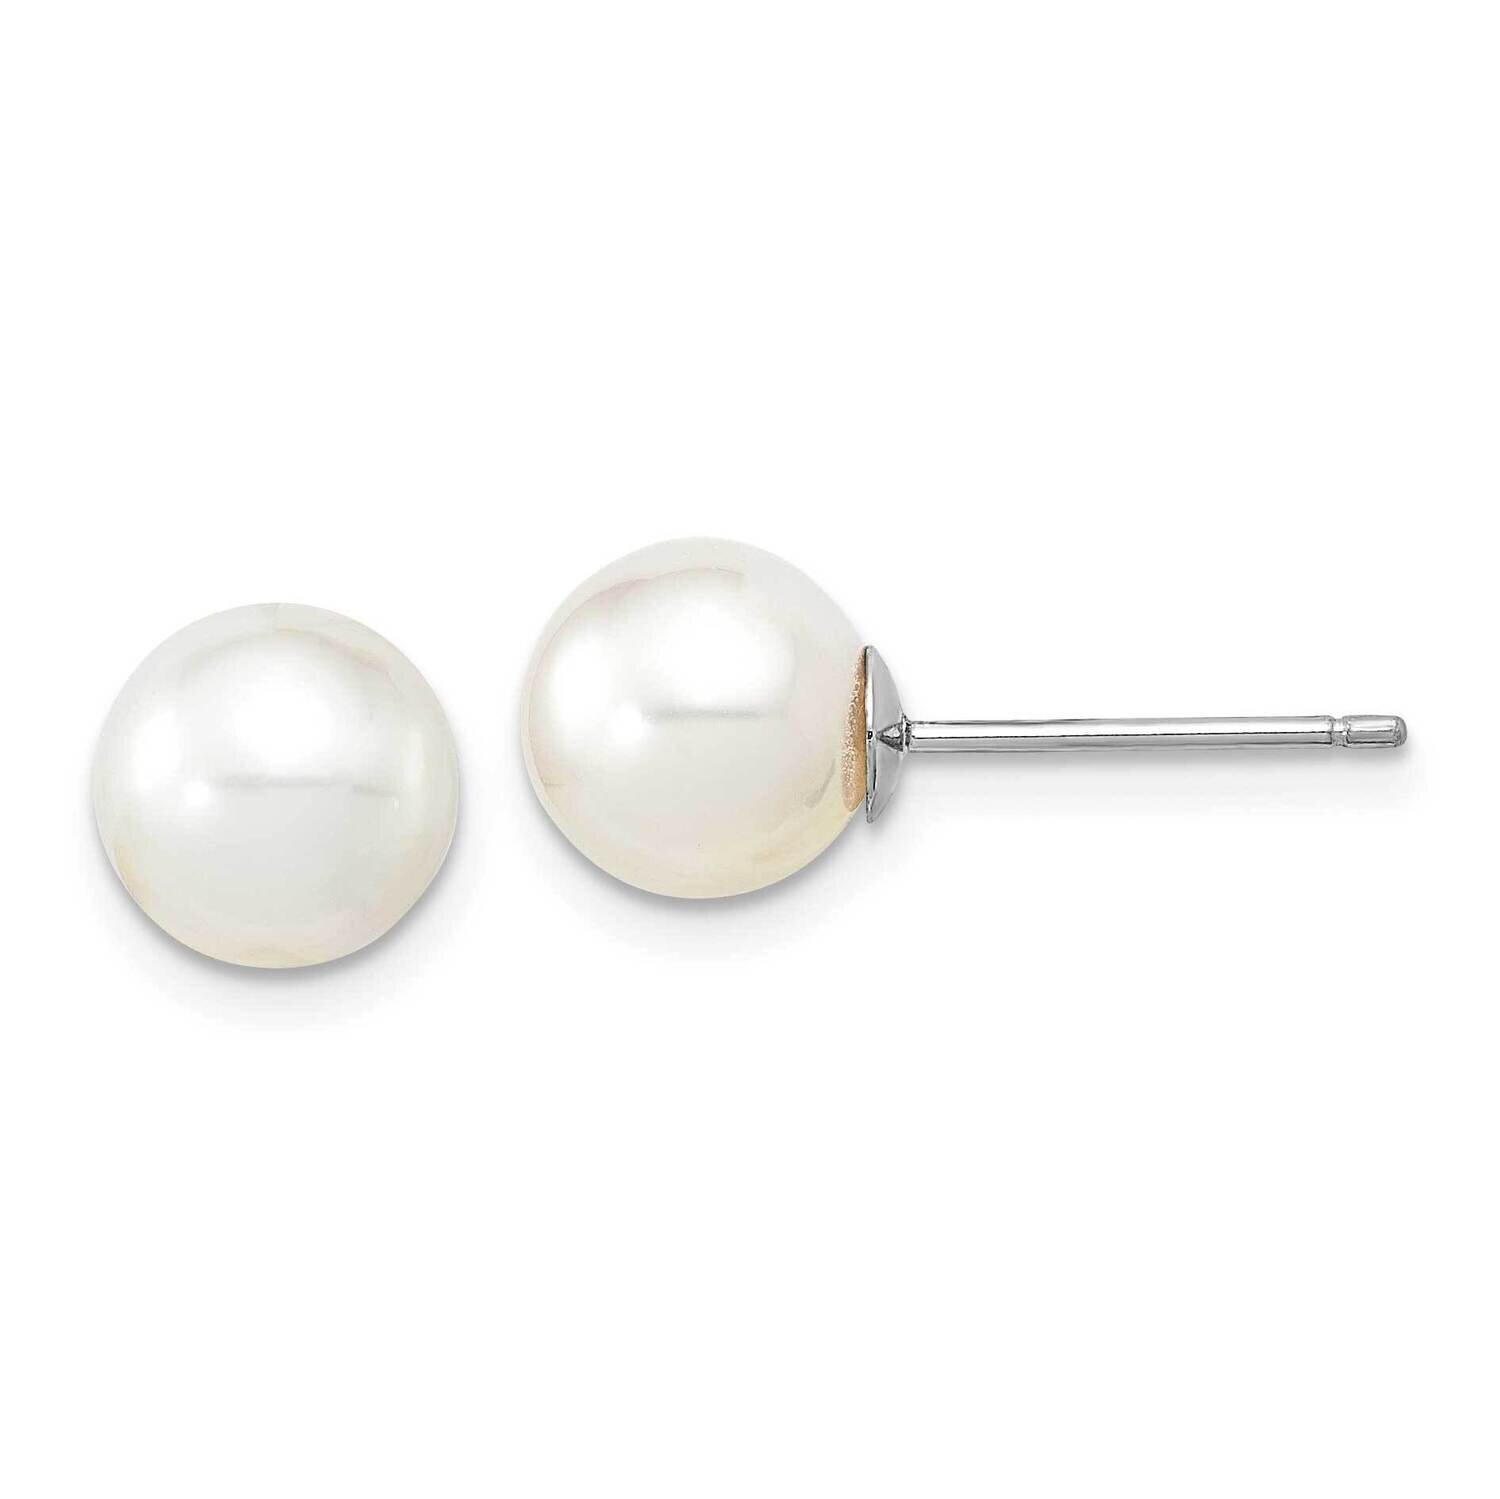 8-9mm Round White Saltwater South Sea Pearl Earrings 14k White Gold XF756WE